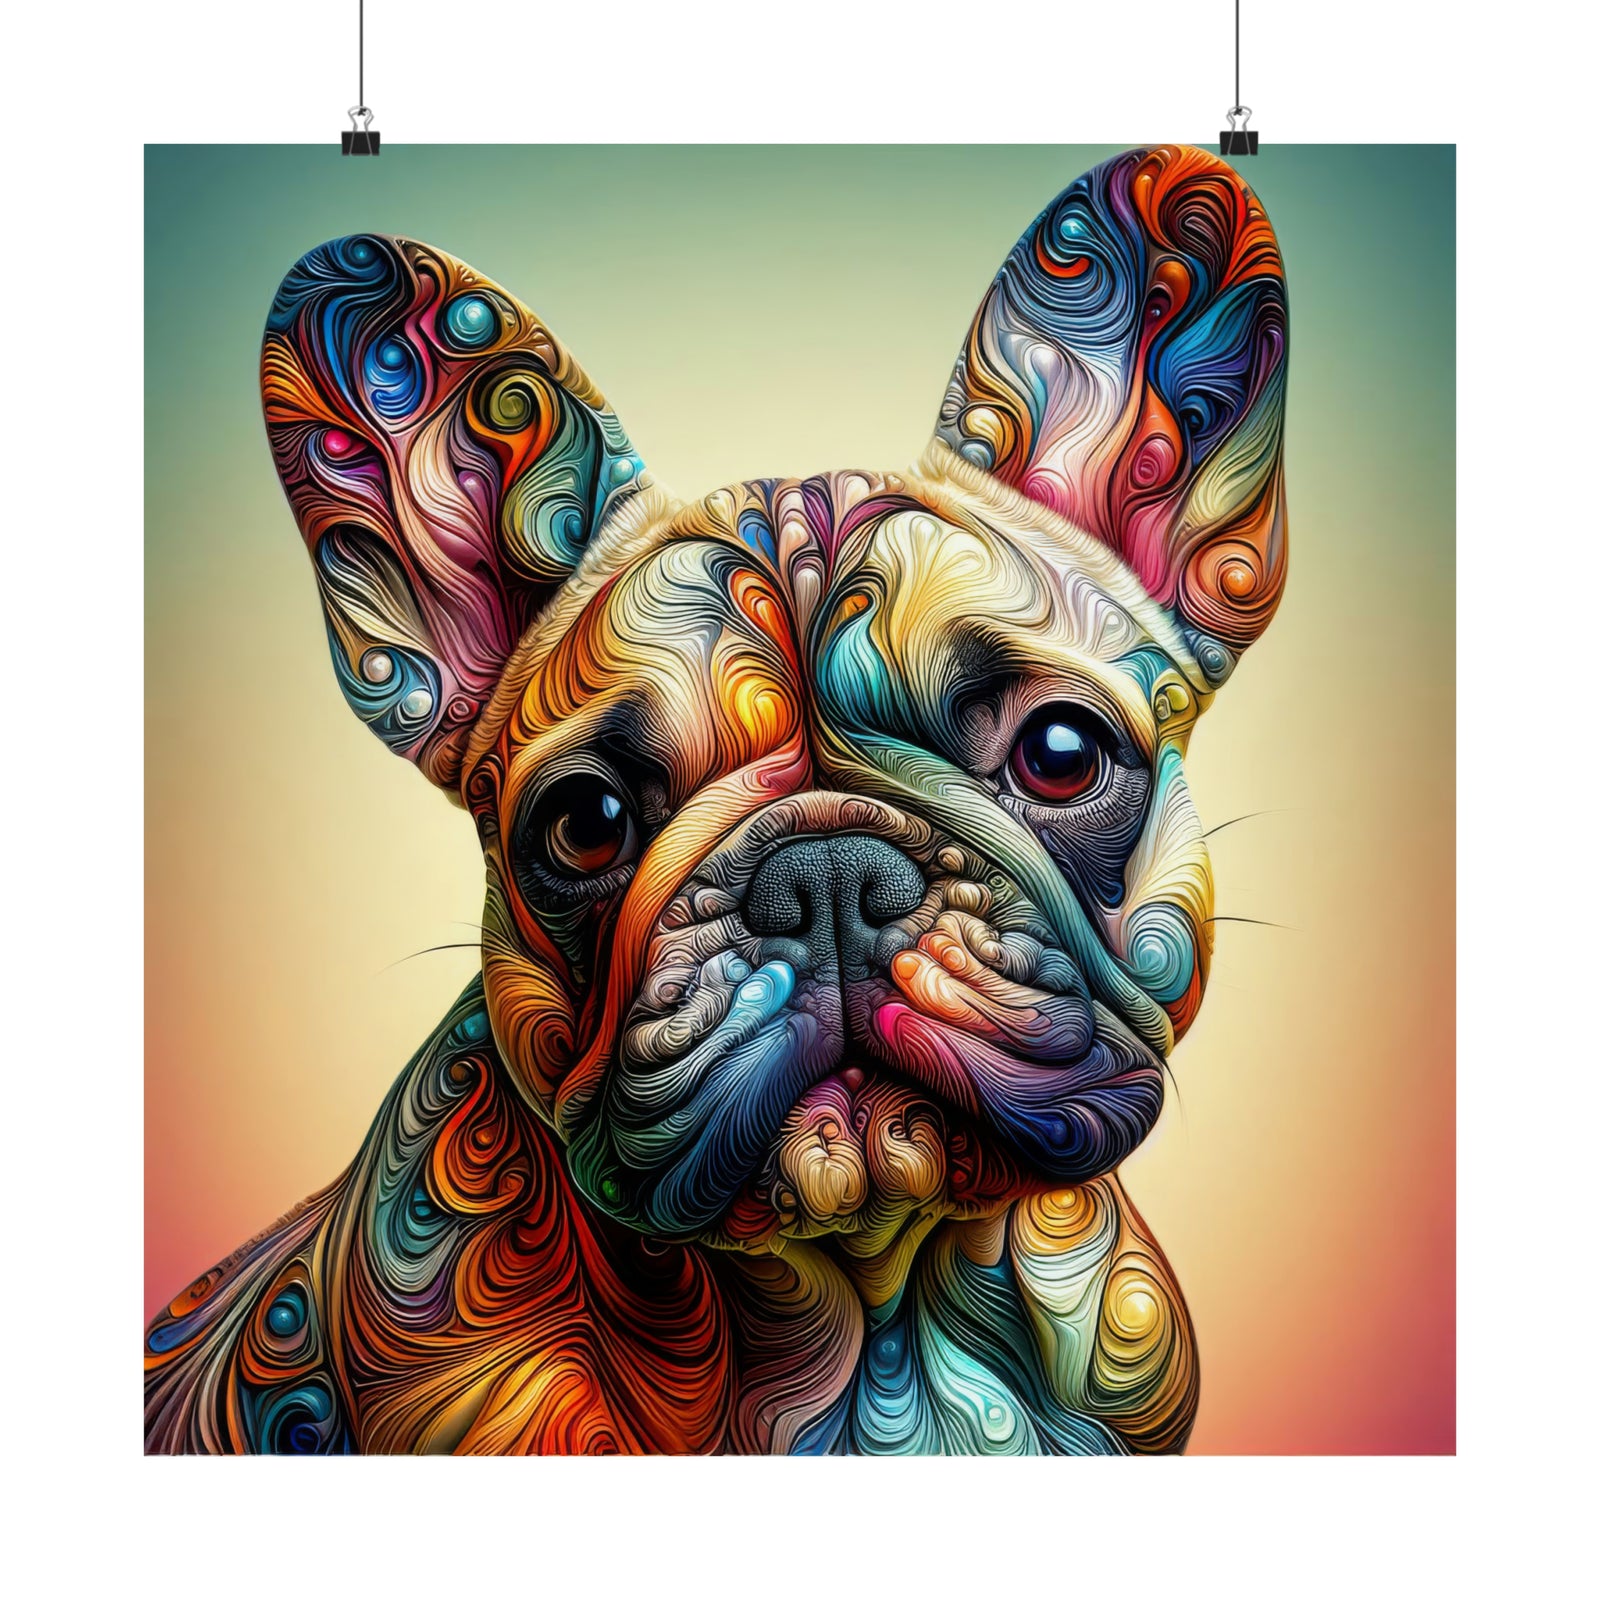 Frenchie's Psychedelic Daydream Poster